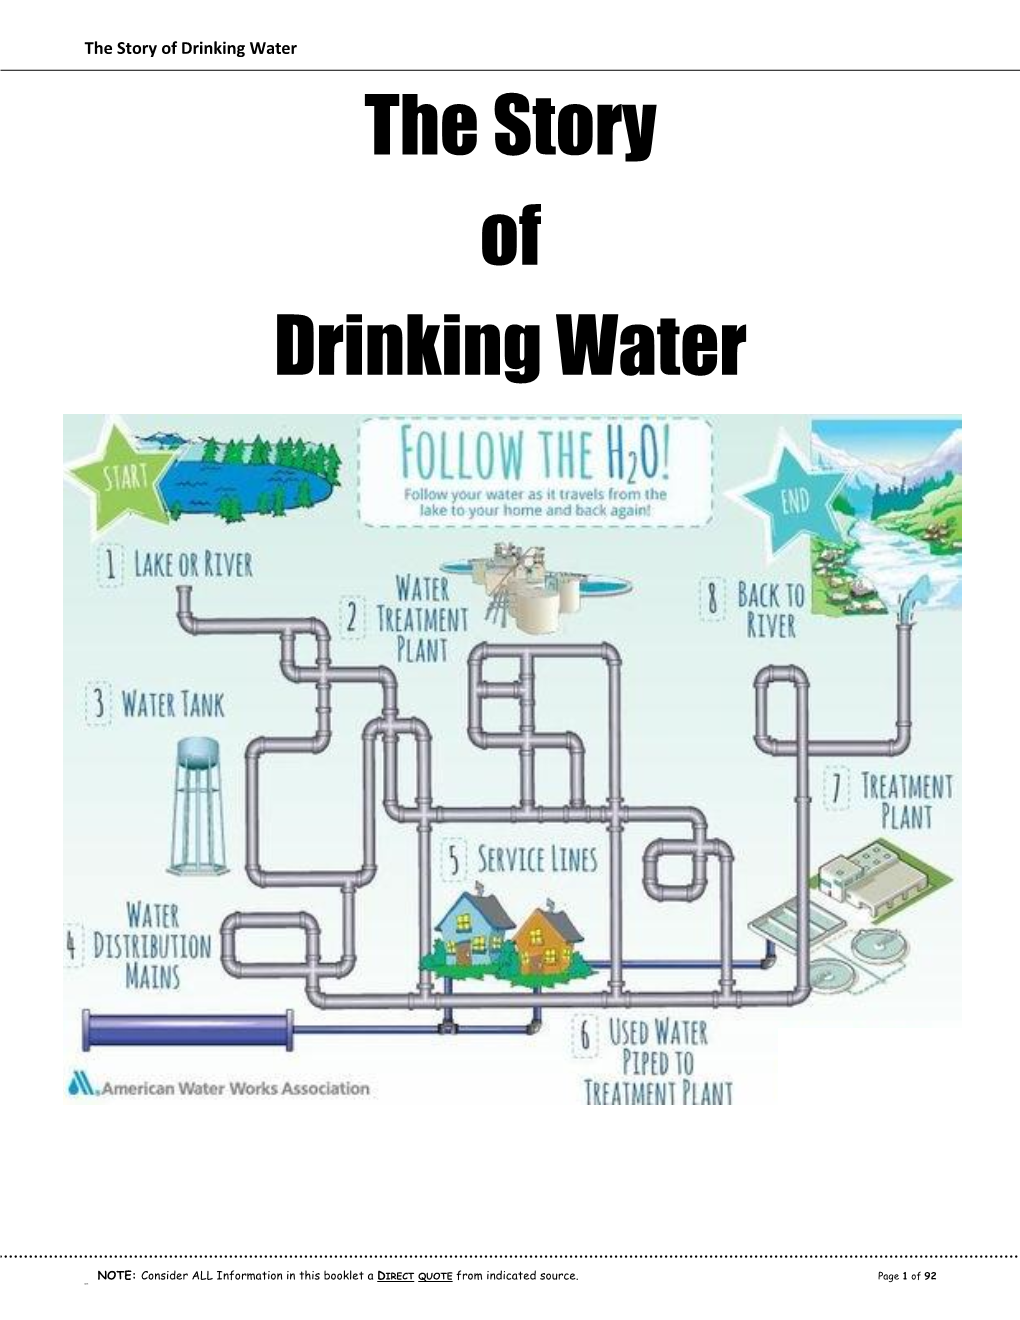 The Story of Drinking Water